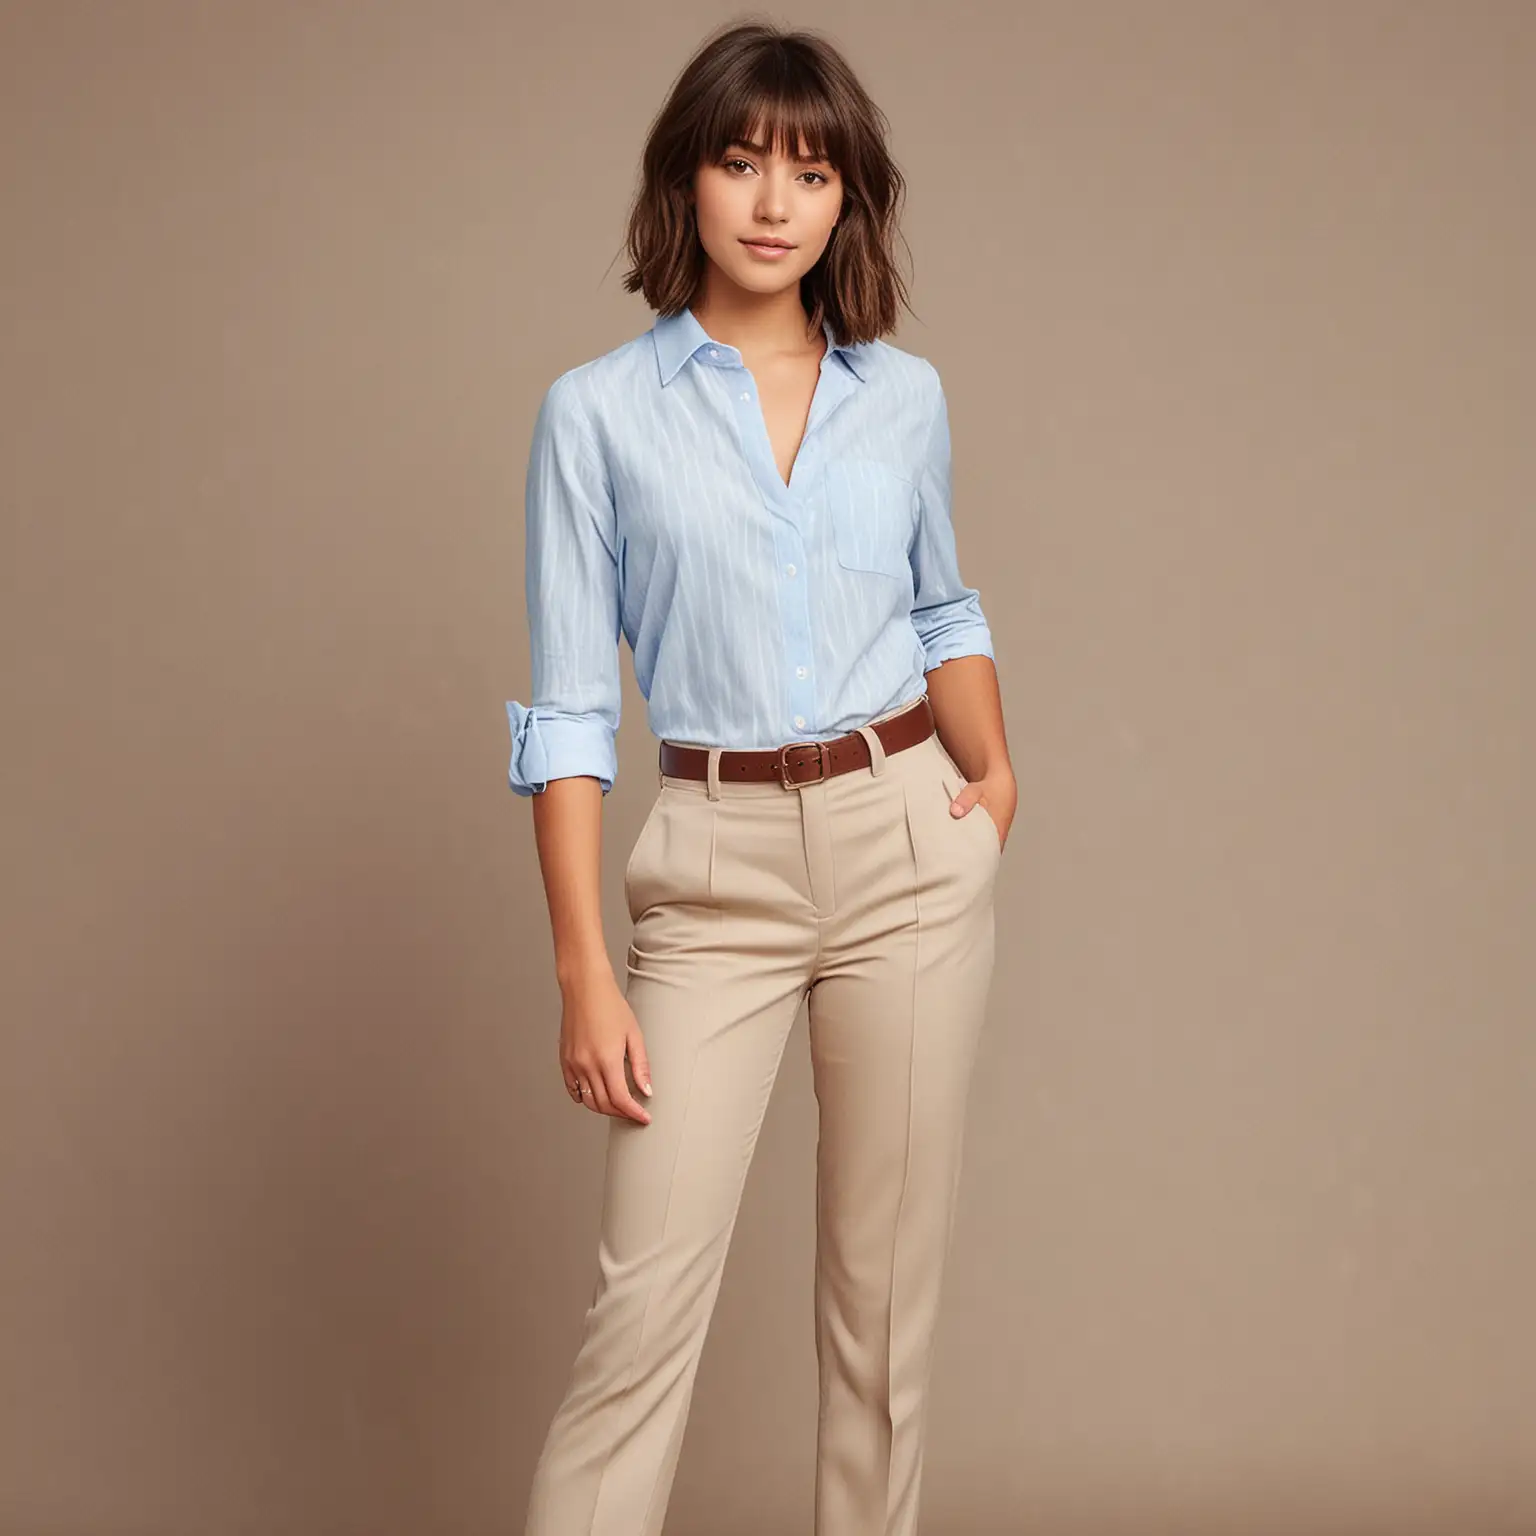 short bob brown hair with bangs latina teenage girl with tailored outfit and relaxed fit pants and blouse for a job interview. should look like a teen girl full body outfit with flats for shoes. 
